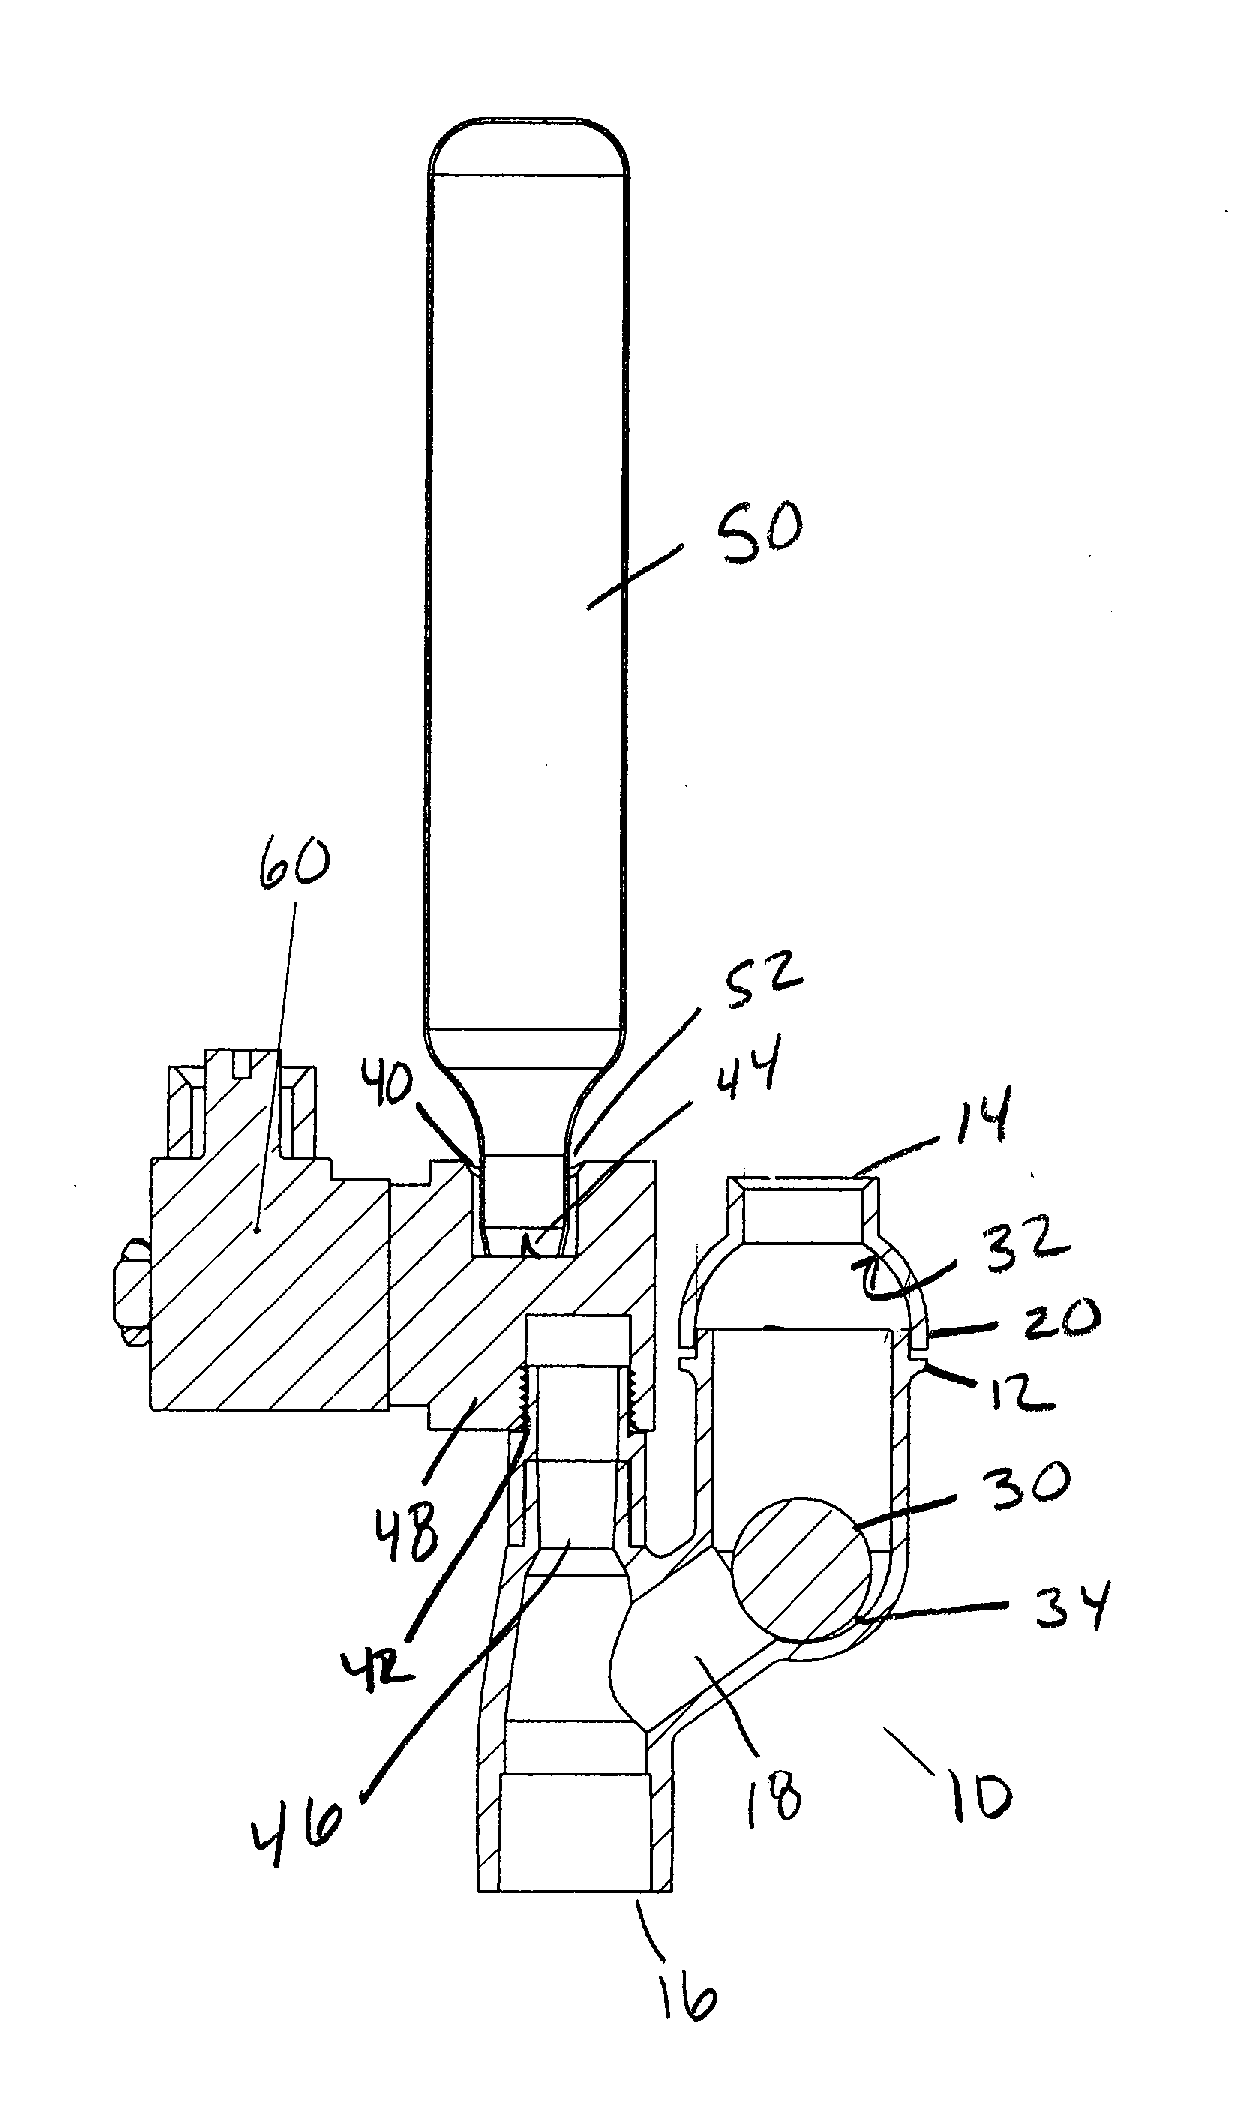 Automatic purging device for ac condensation drain lines